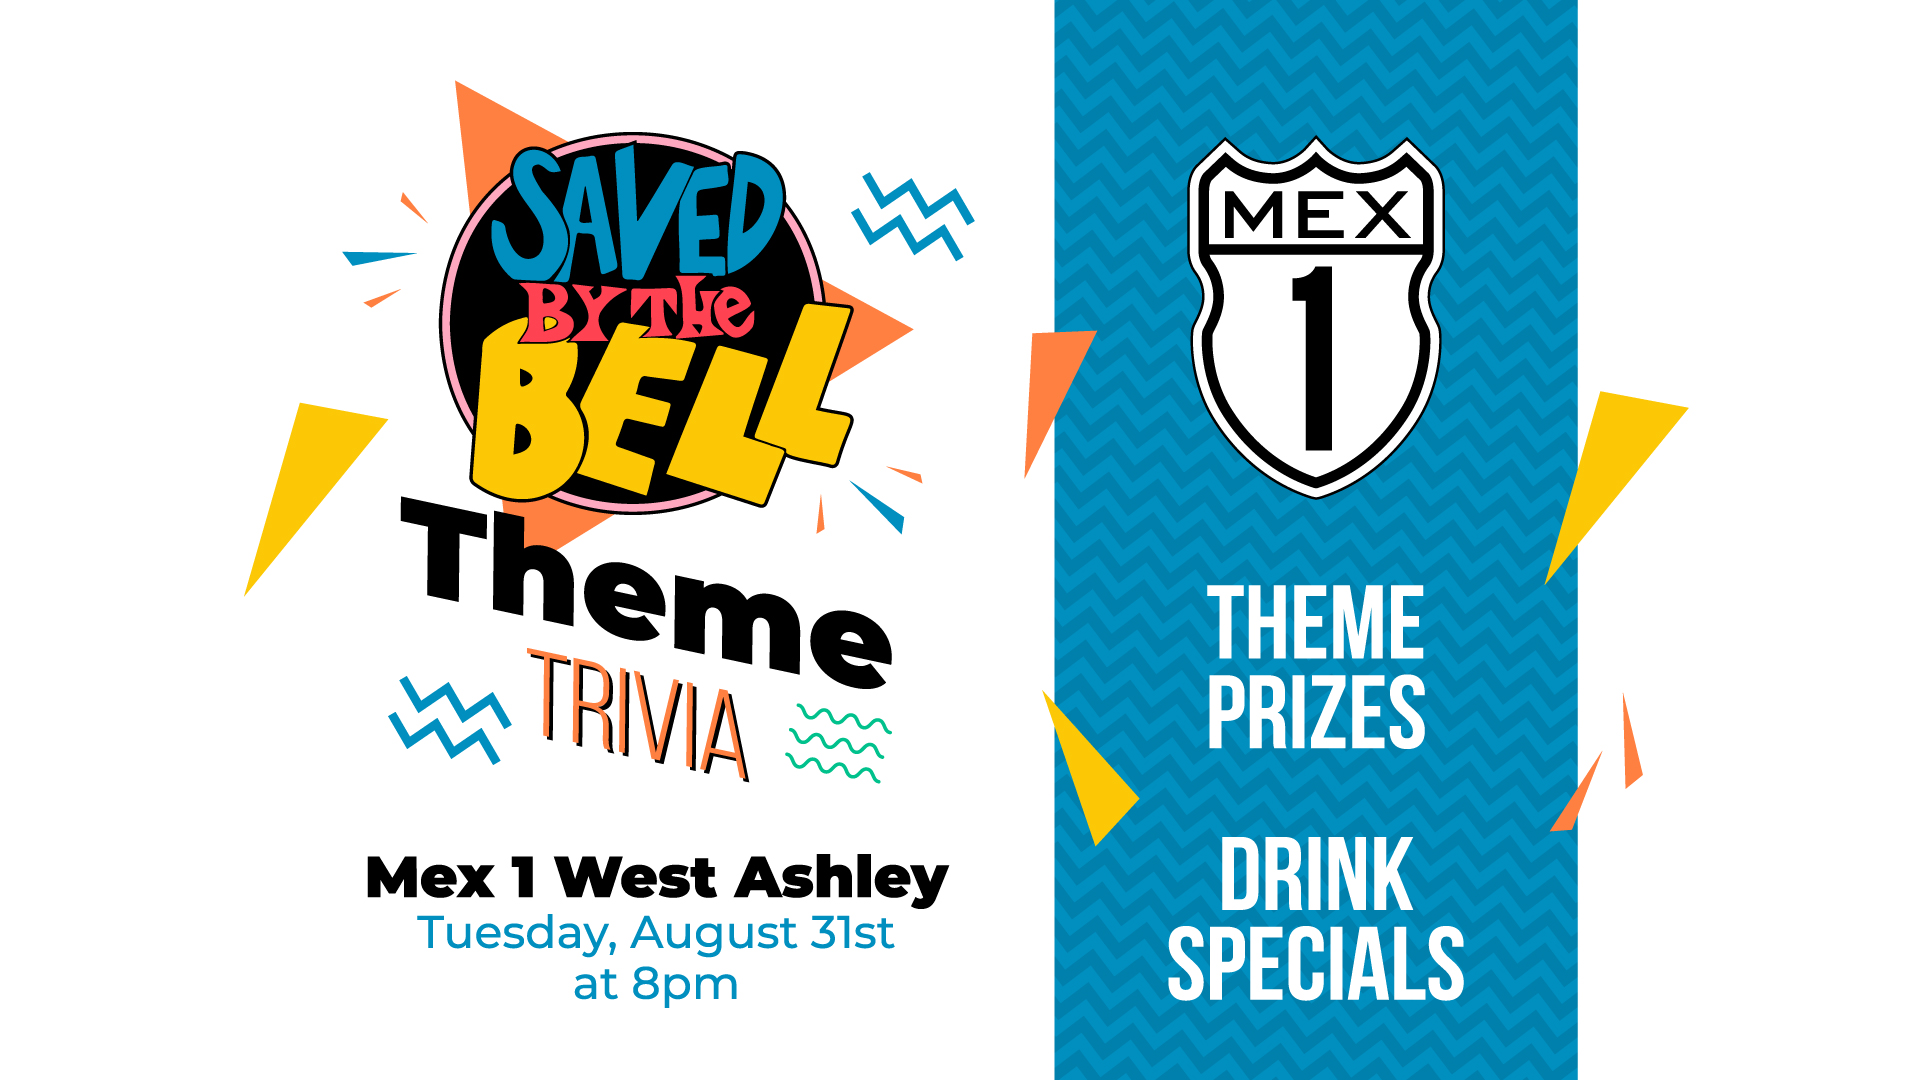 Saved by the Bell theme trivia at Mex 1 West Ashley